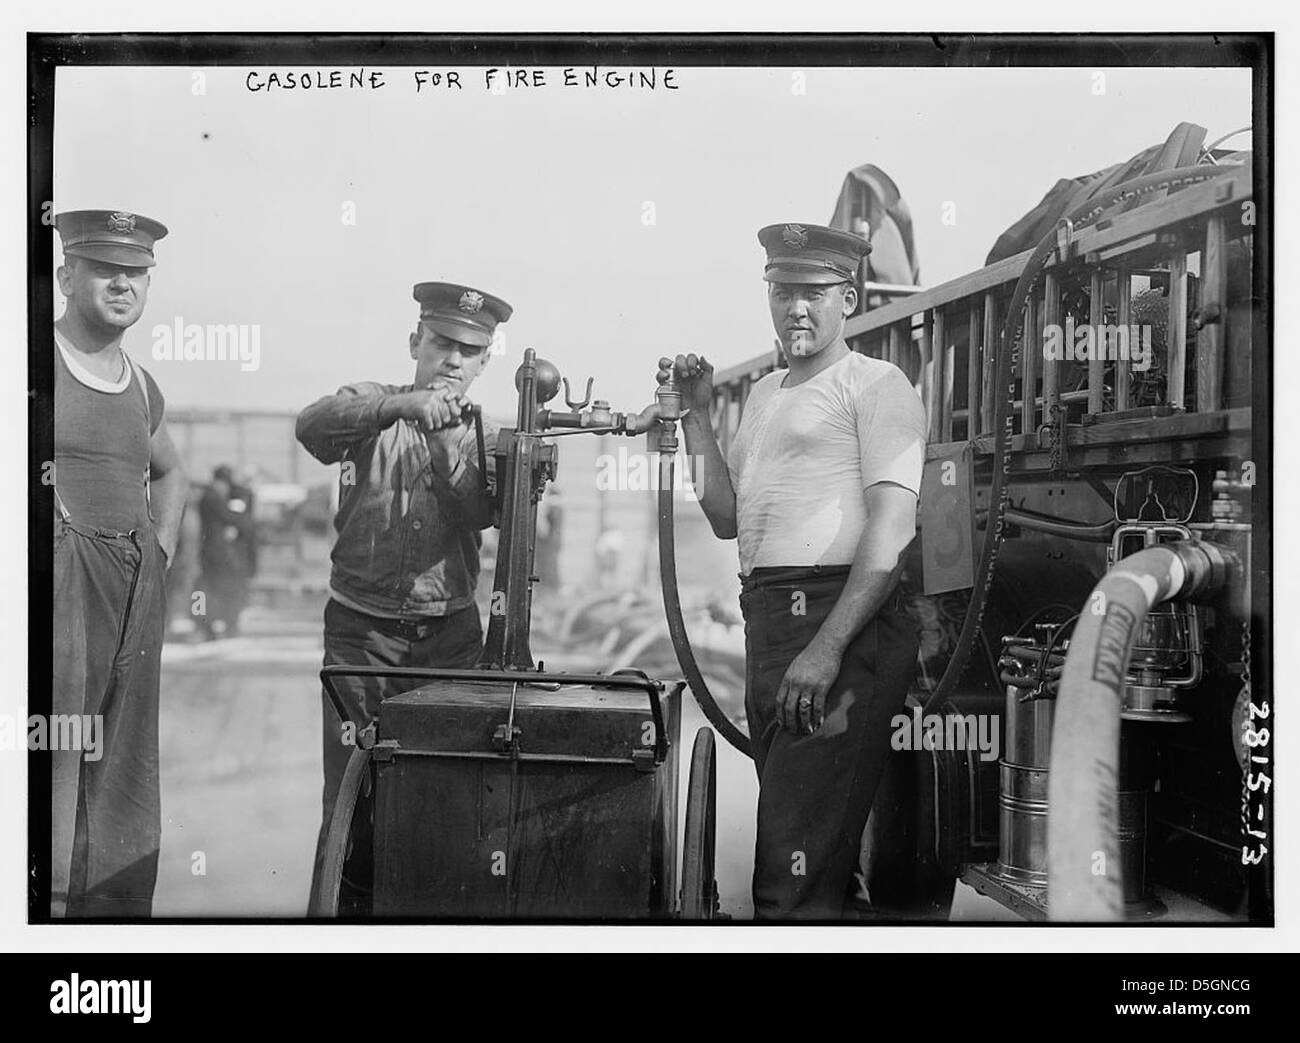 Gasoline for fire engine (LOC) Stock Photo